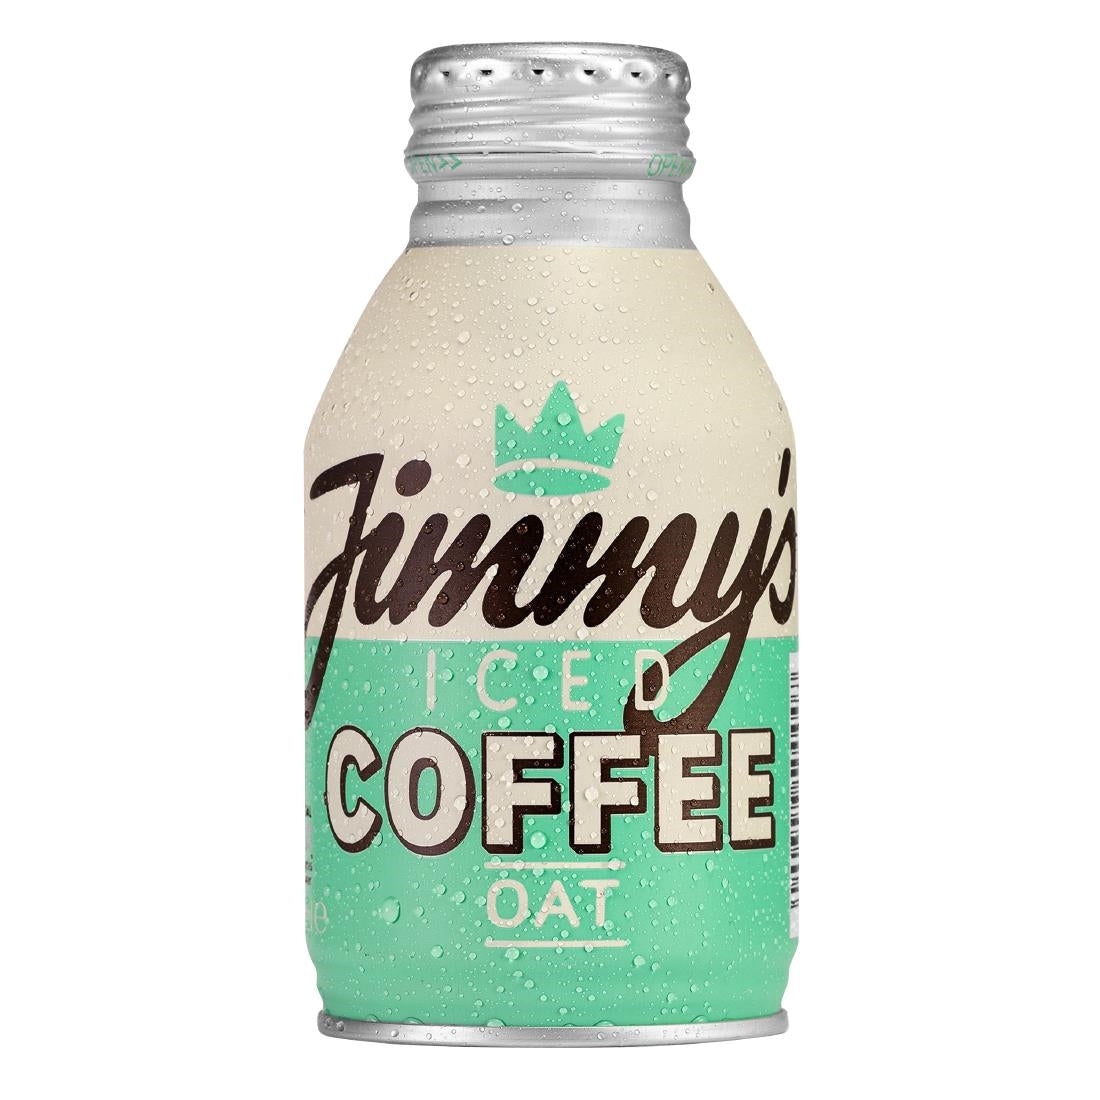 HS813 Jimmy's Oat Iced Coffee BottleCan 275ml (Pack of 12)